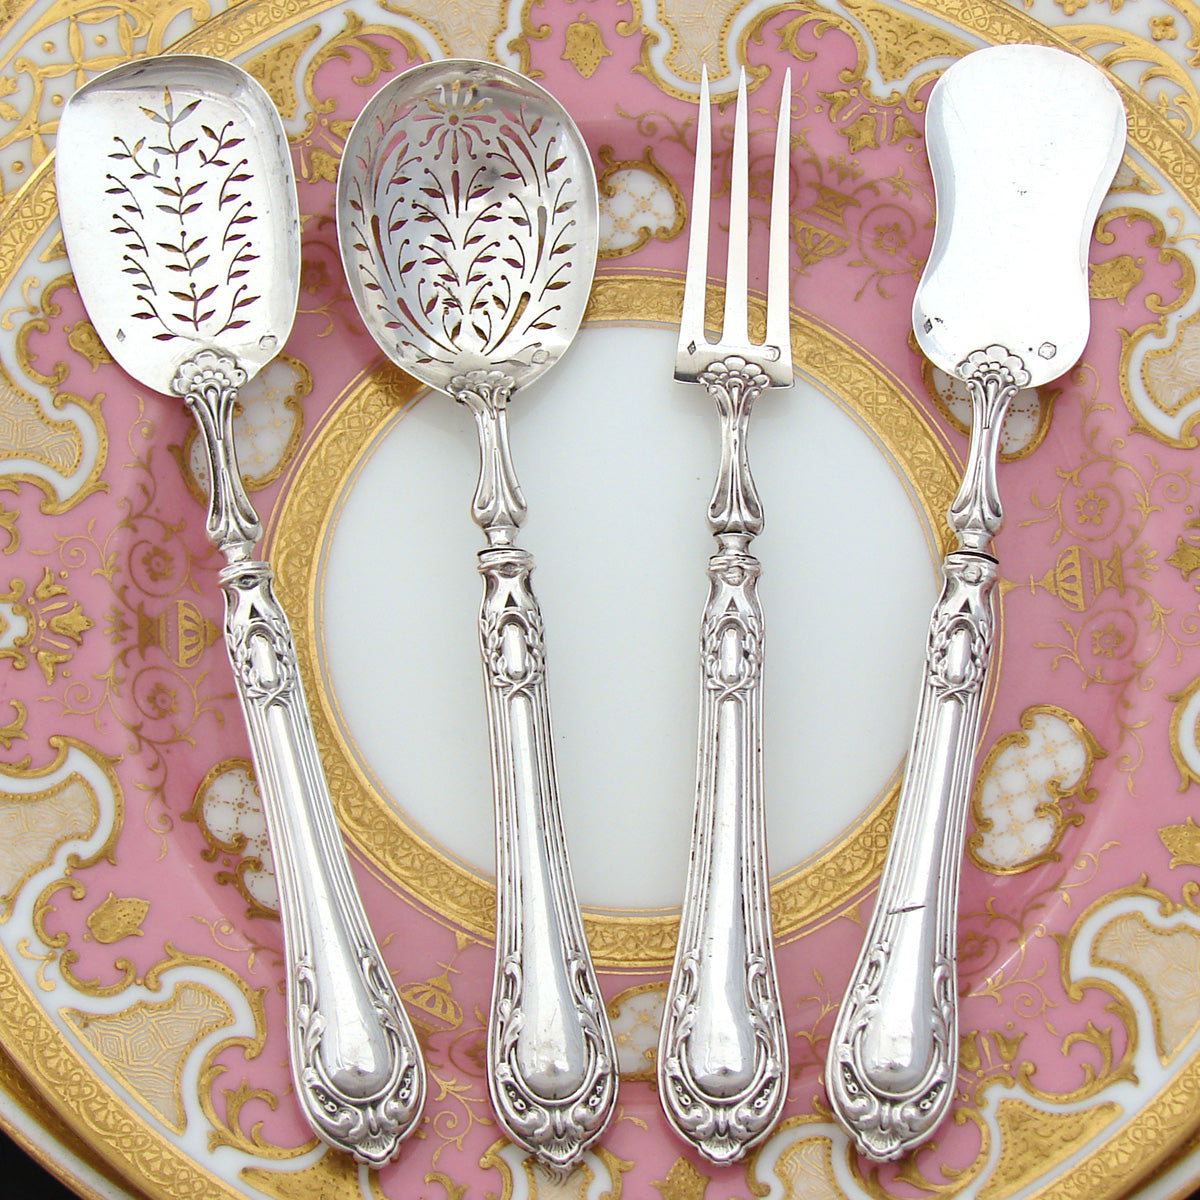 Antique French .800 (nearly sterling) Silver 4pc Condiment or Hors D'Oeuvre Set, Scrolling Pattern